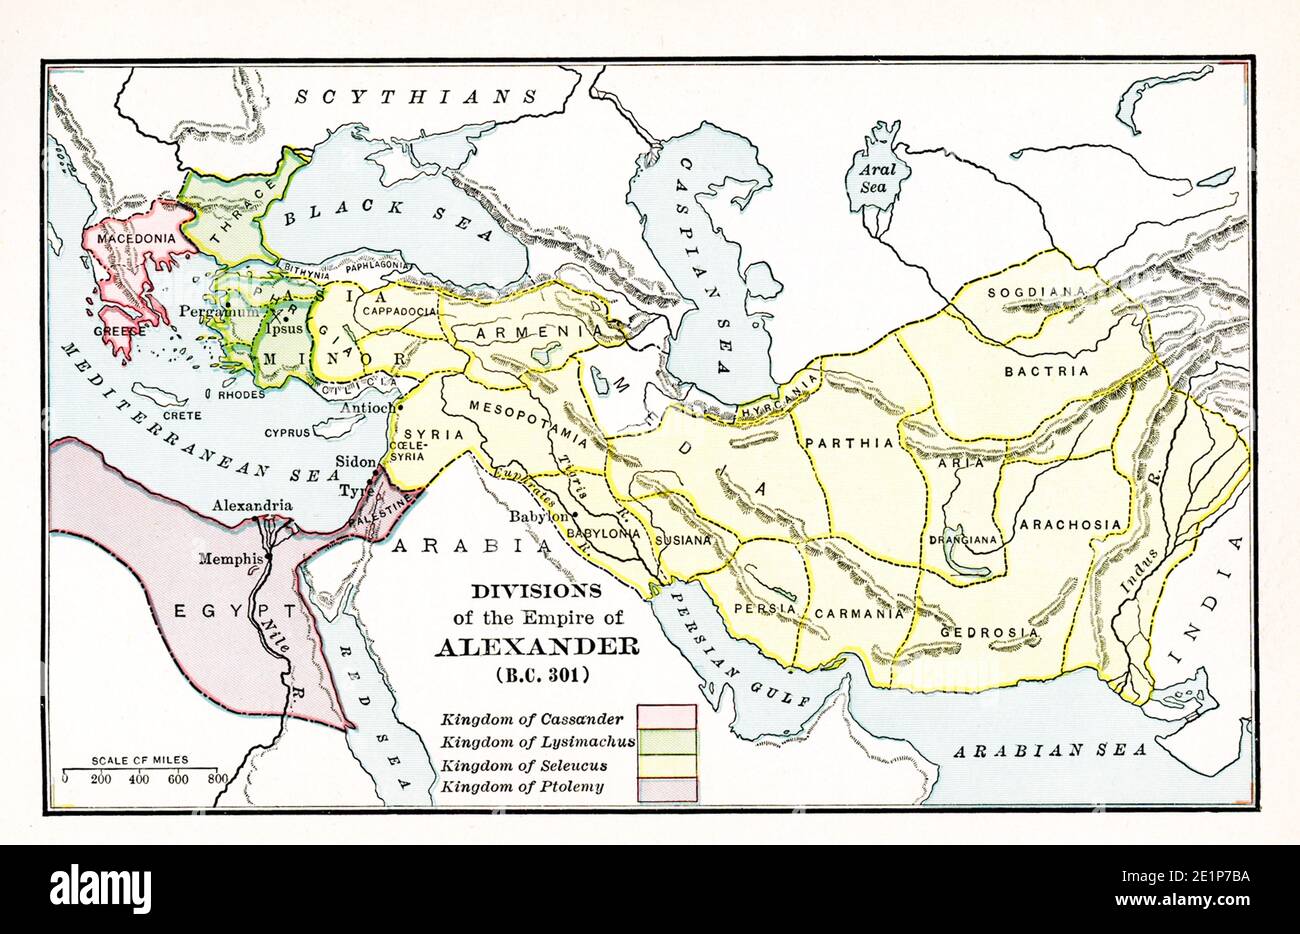 Map of the Divisions of the Empire of Alexander in BC 301.  The legend reads: Pink: Kingdom of Cassander; Green: Kingdom of Lysimachus; Yellow: Kingdom of Seleucus; Purple: Kingdom of Ptolemy. Alexander the Great fell ill in Babylon on his return to Greece and Macedonia. The year was 323 B.C. This map shows the divisions of Alexander’s empire among the diadochoi (successors)  at the time of his death. Stock Photo